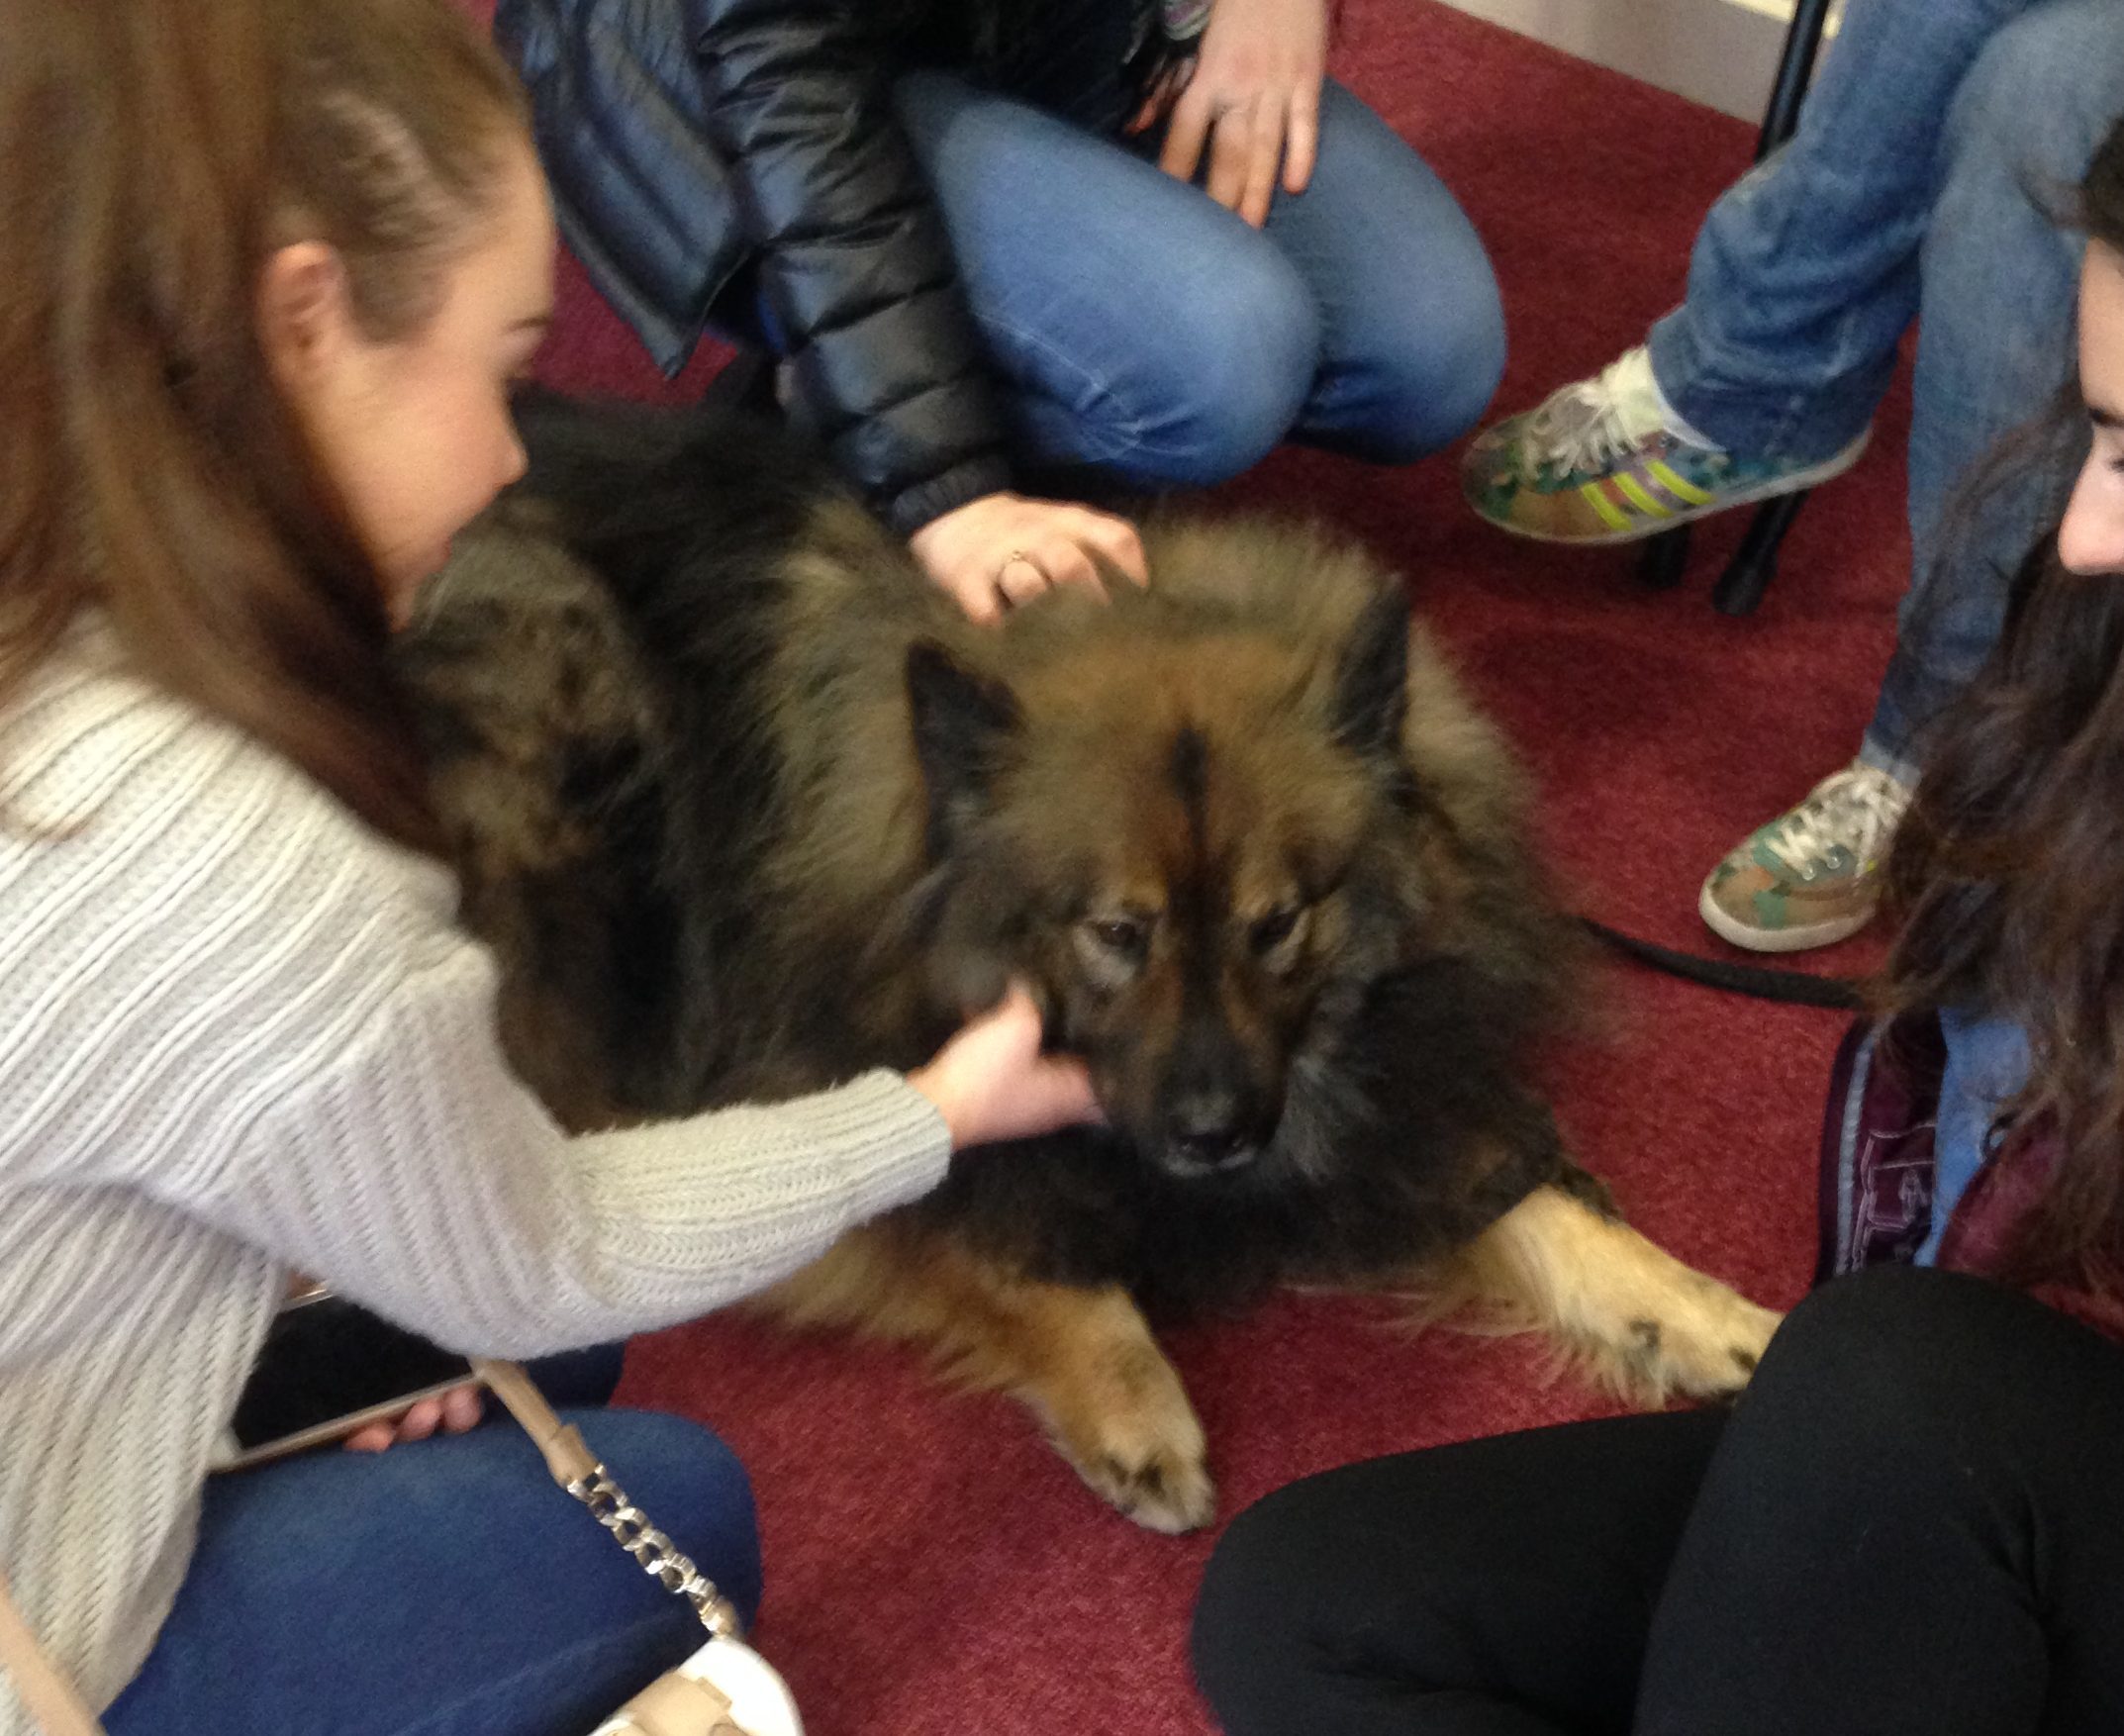 Lupo the Eurasier got a lot of attention from the students